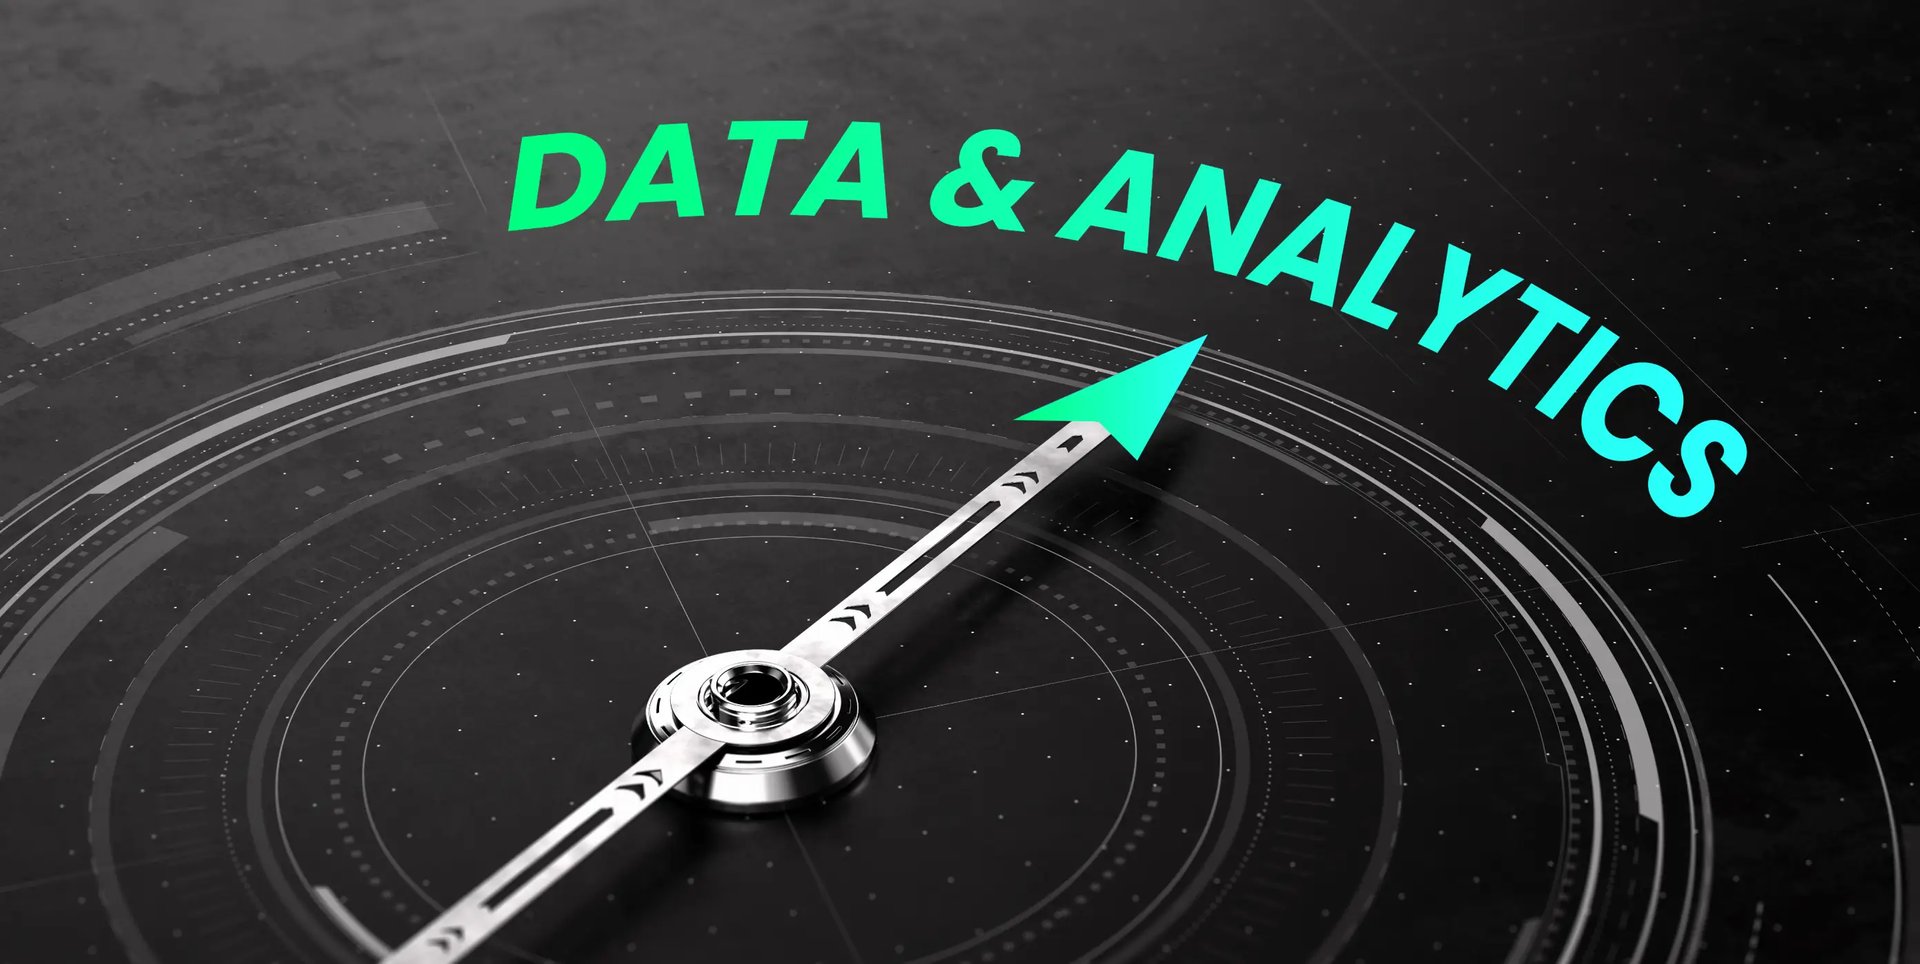 A compass where the needle points towards the words “data & analytics”, emphasizing data's guiding role